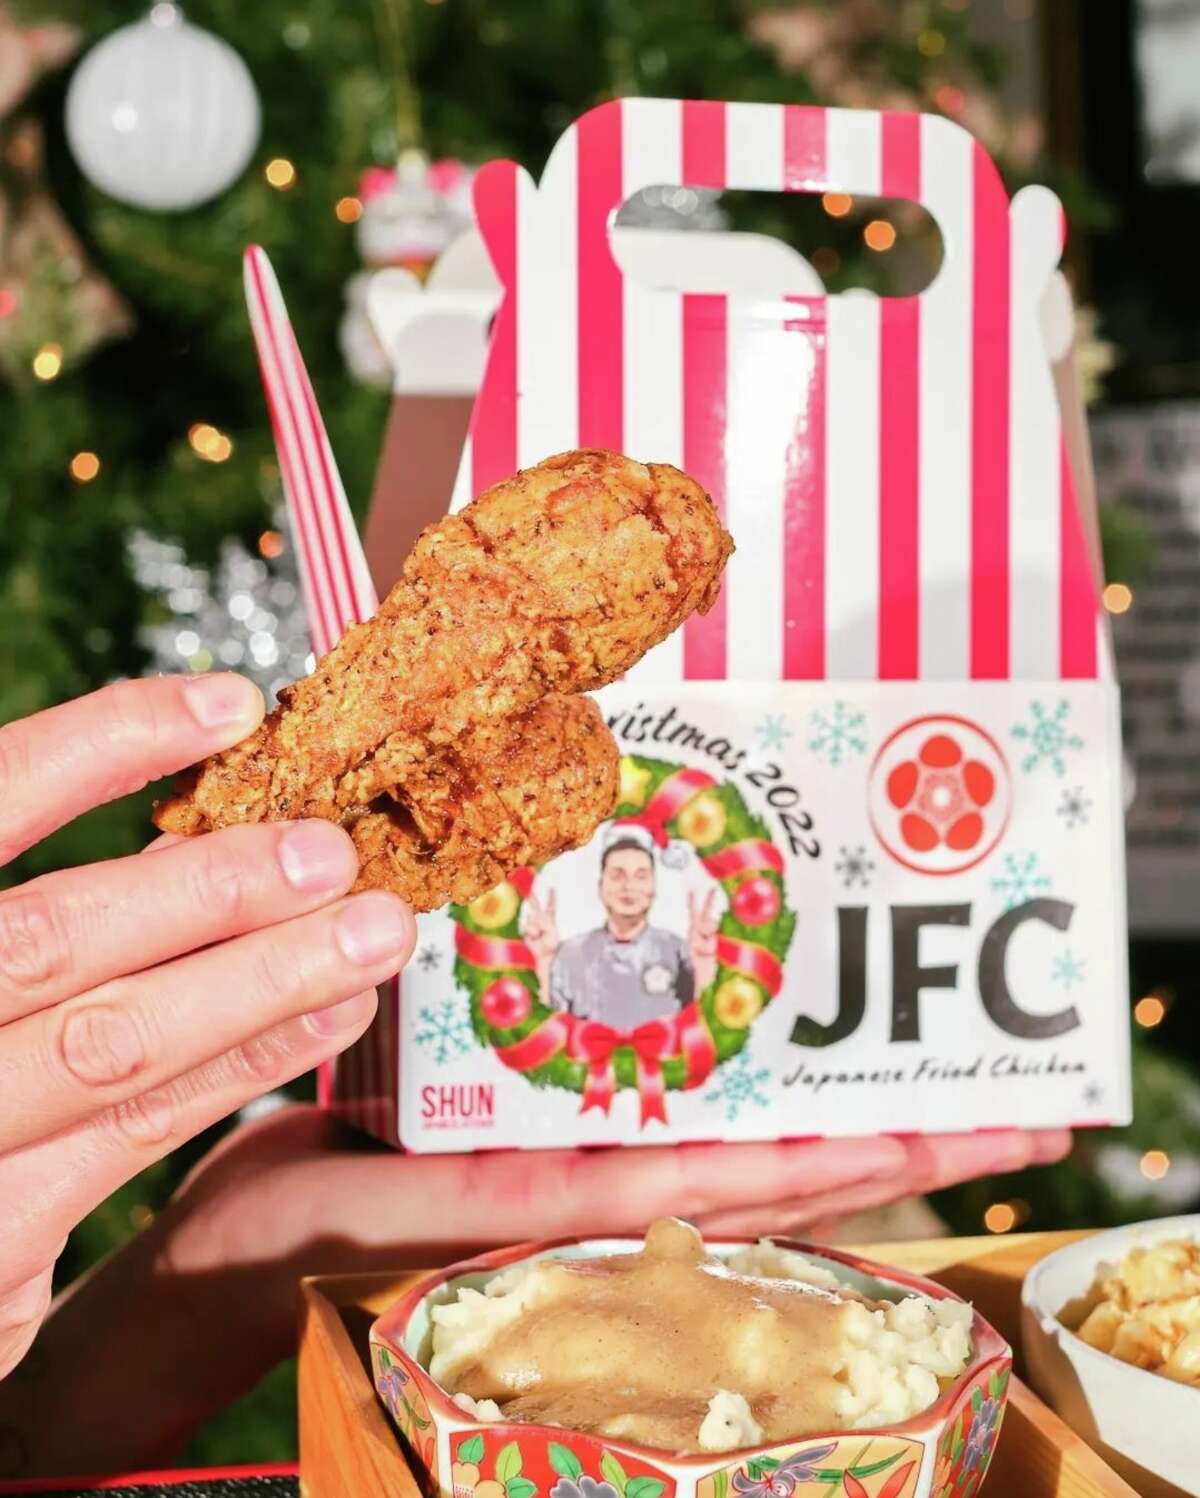 The Japanese Fried Chicken or JFC combo at Shun Japanese Kitchen. The box is $45 and comes with a variety of food, including fried chicken, curry rice, truffle mac n' cheese, a miso brown butter biscuit, and mashed potatoes with a Wagyu gravy. Source: @eatingwithstephanho